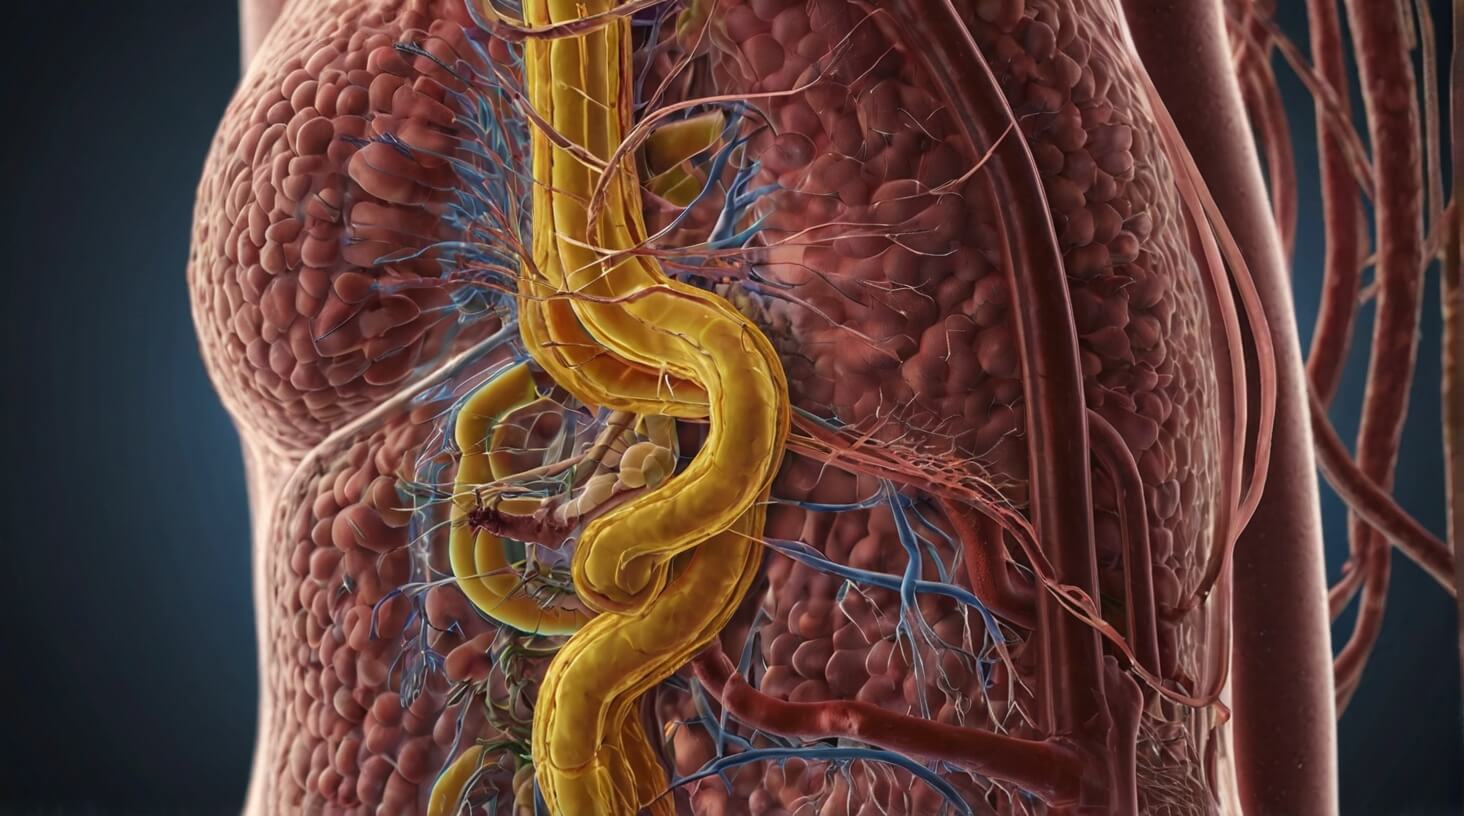 Graphic illustration depicting the intricate link between the gut and immune system, highlighting the importance of understanding their connection for overall health.